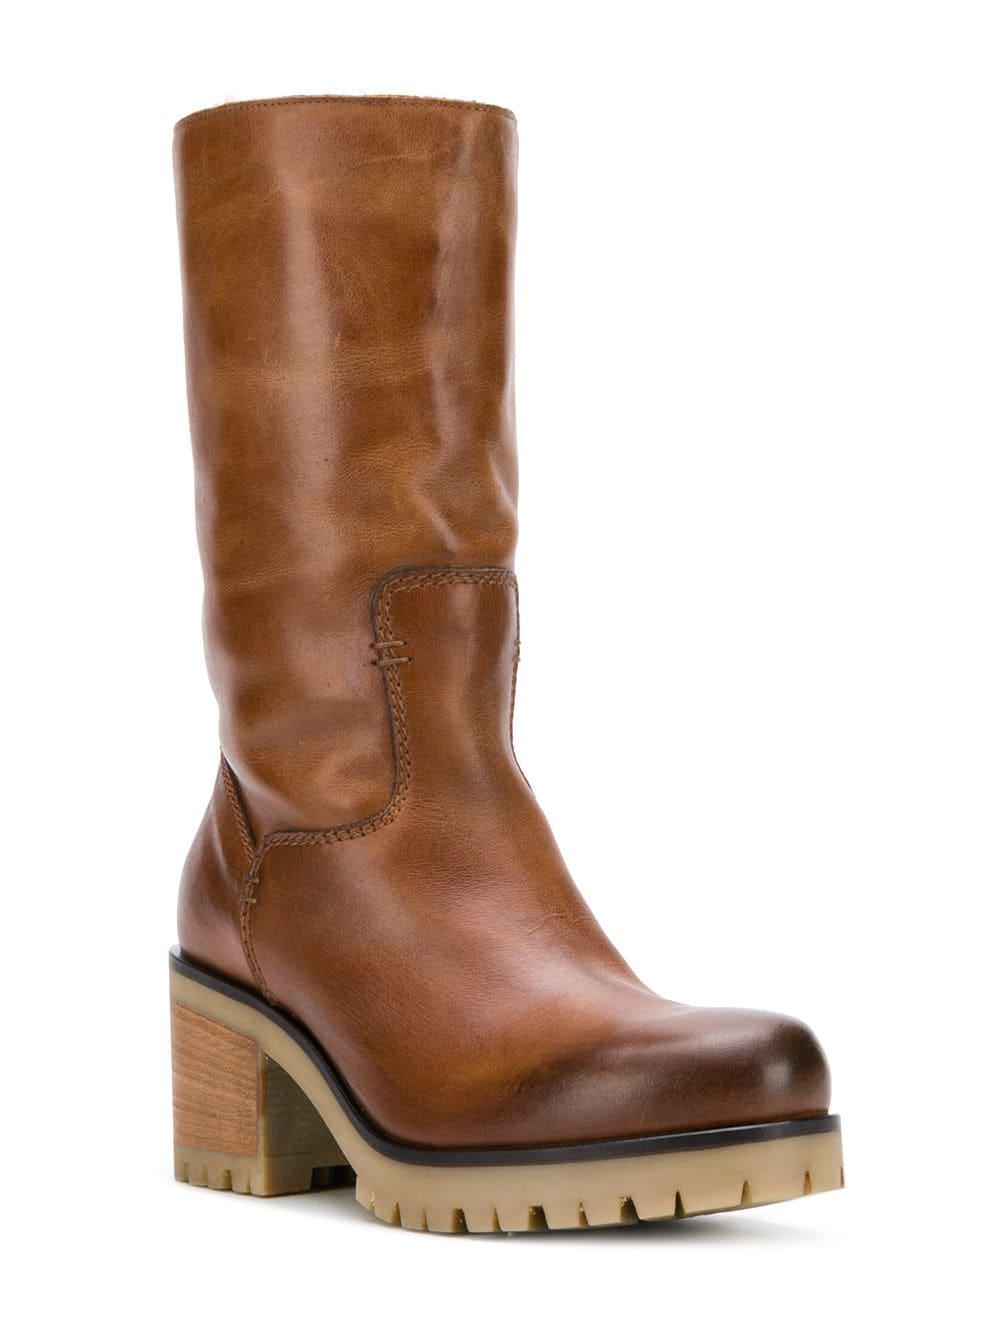 Strategia Mid-calf High Boots in Brown - Lyst